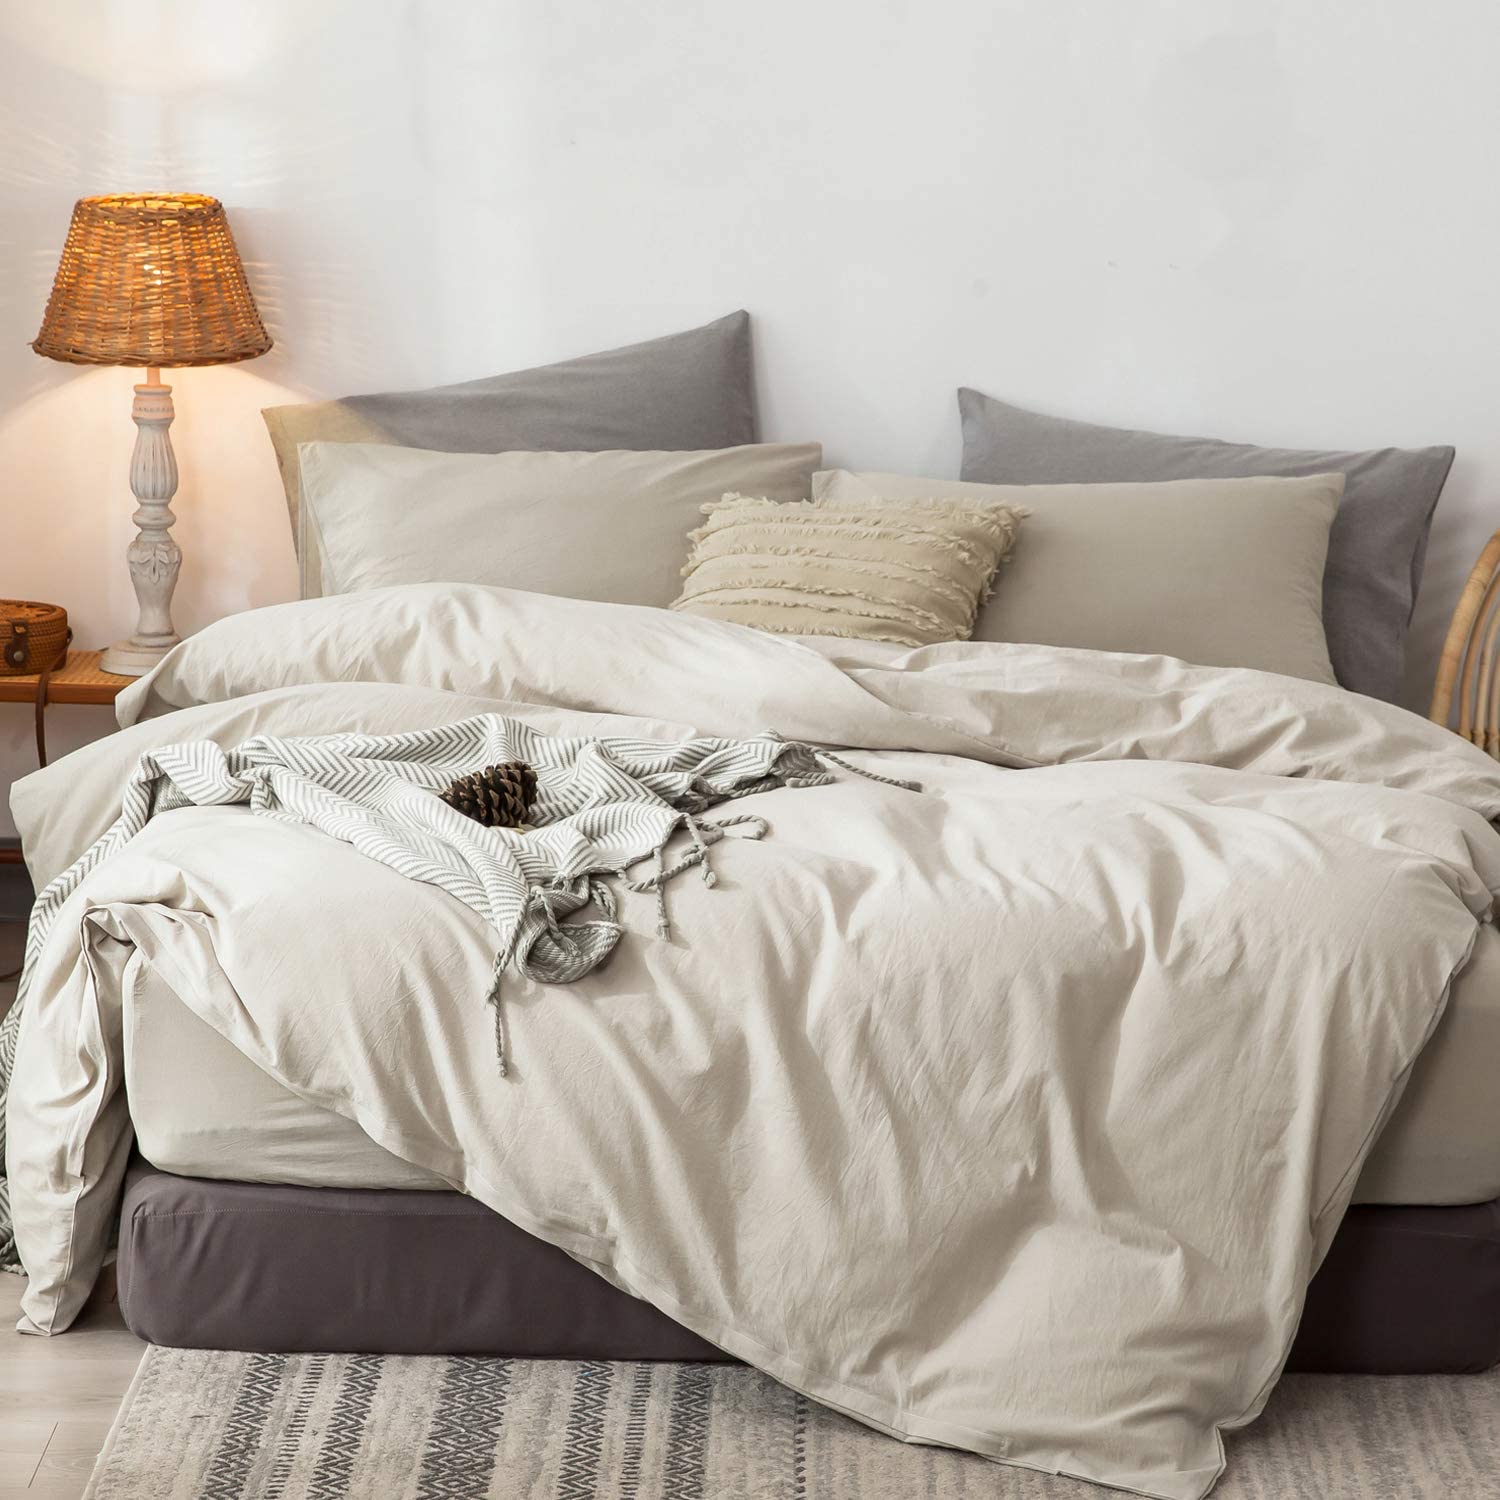 Price:$79.99 MooMee Bedding Duvet Cover Set 100% Washed Cotton Linen Like Textured Breathable Durable Soft Comfy (Cream Grey, Queen) : Home & Kitchen